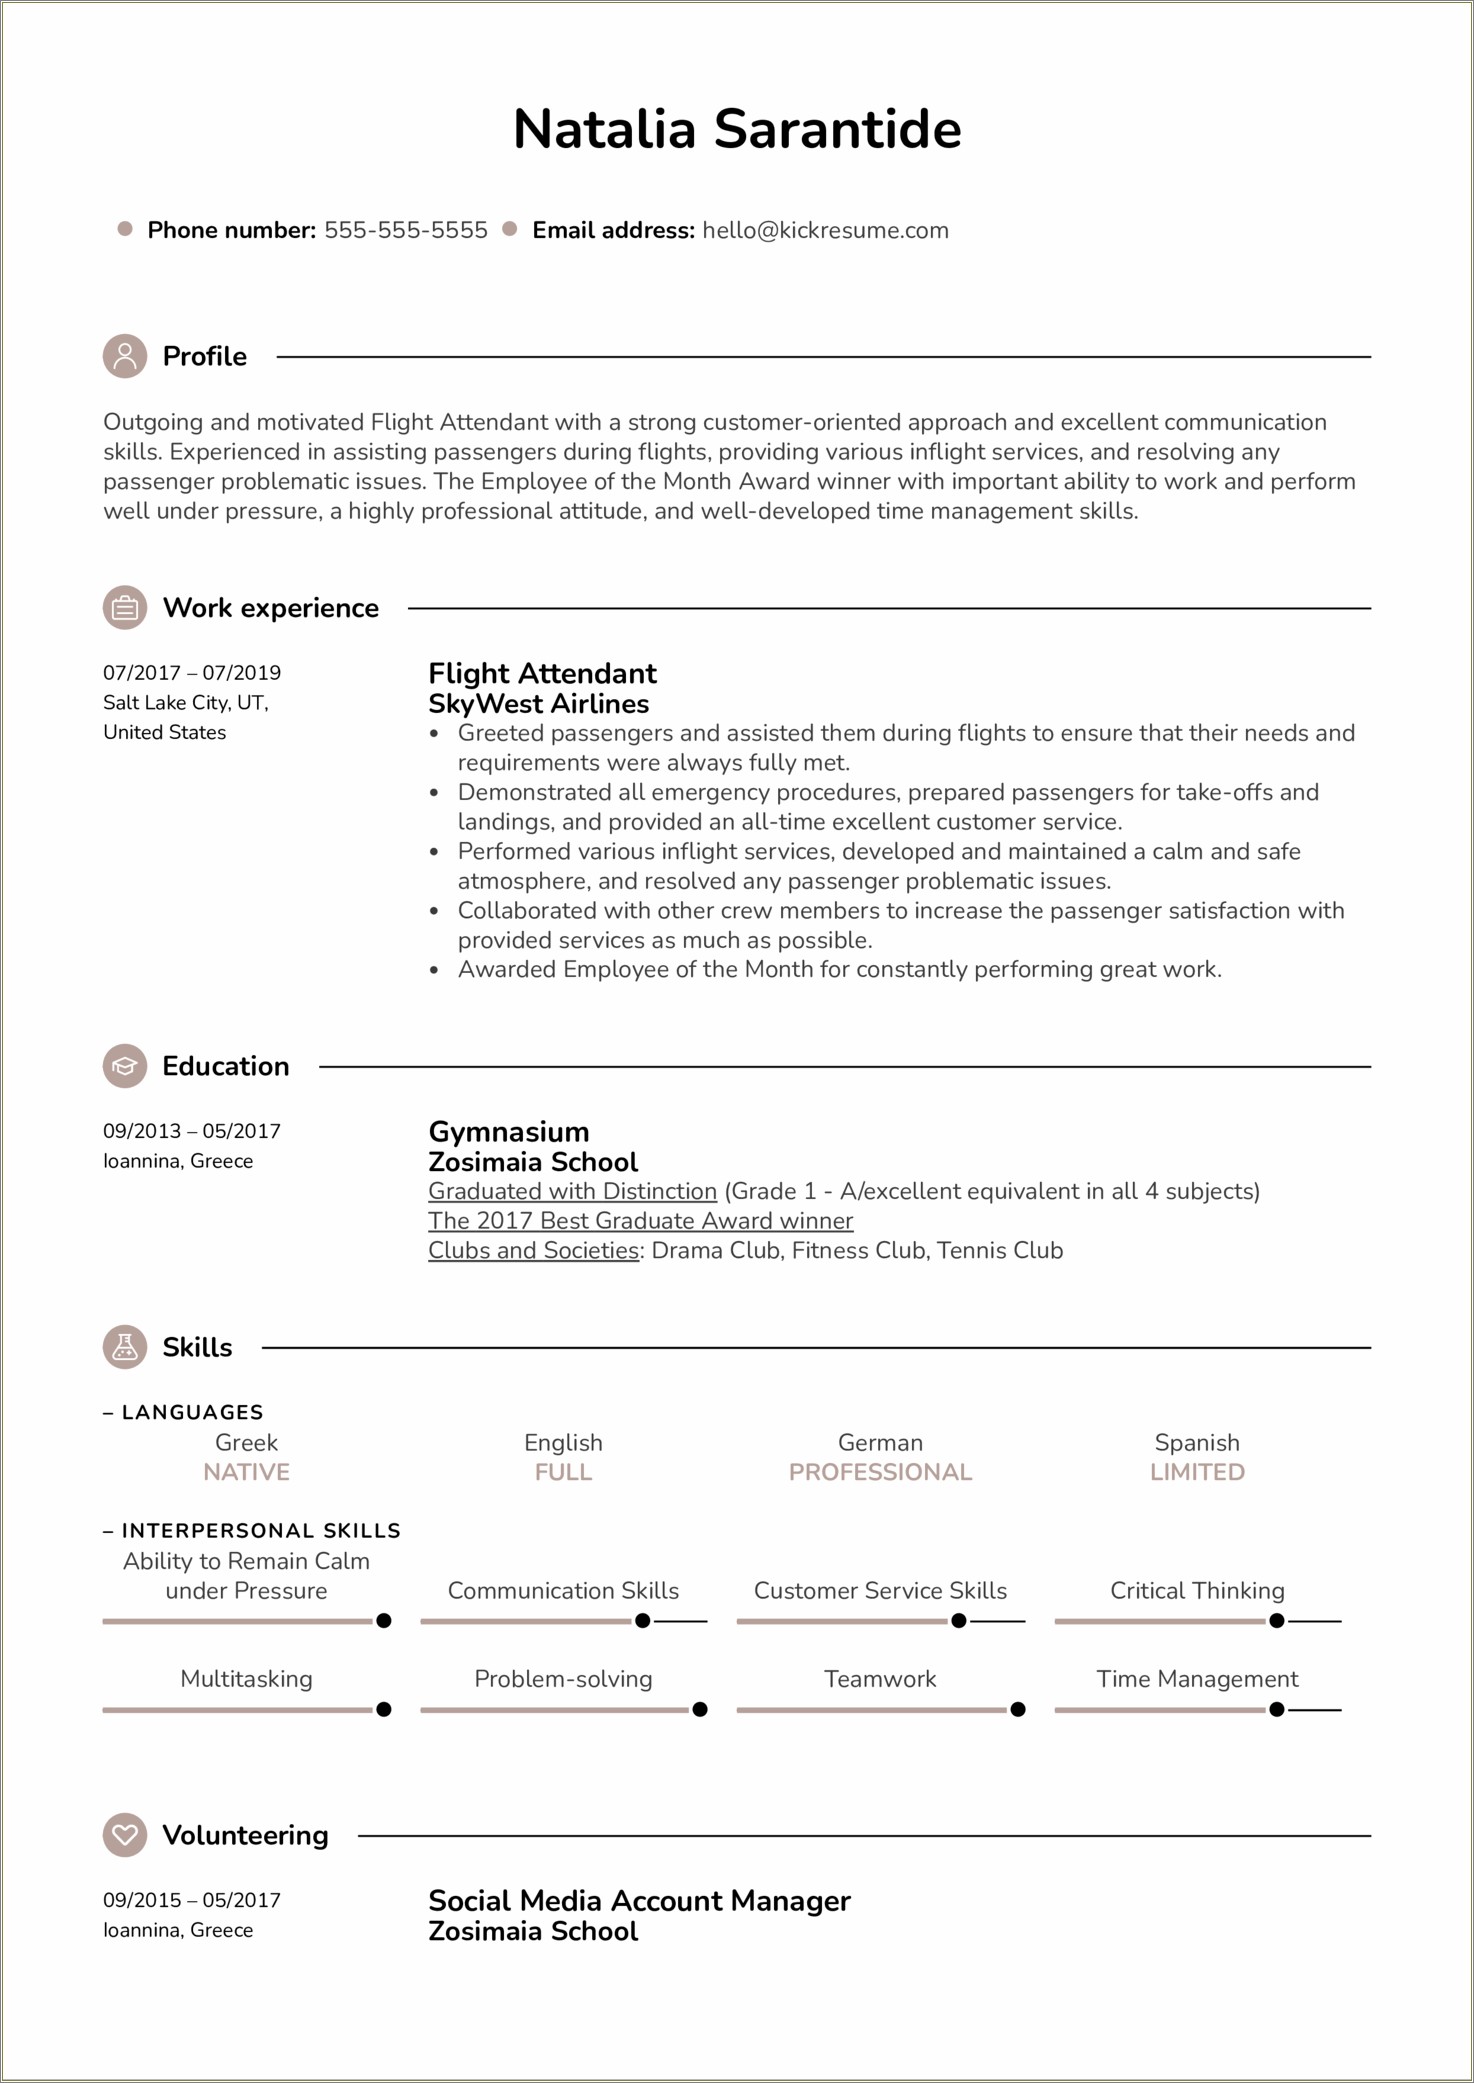 Generic Objective For Resume For Customer Service